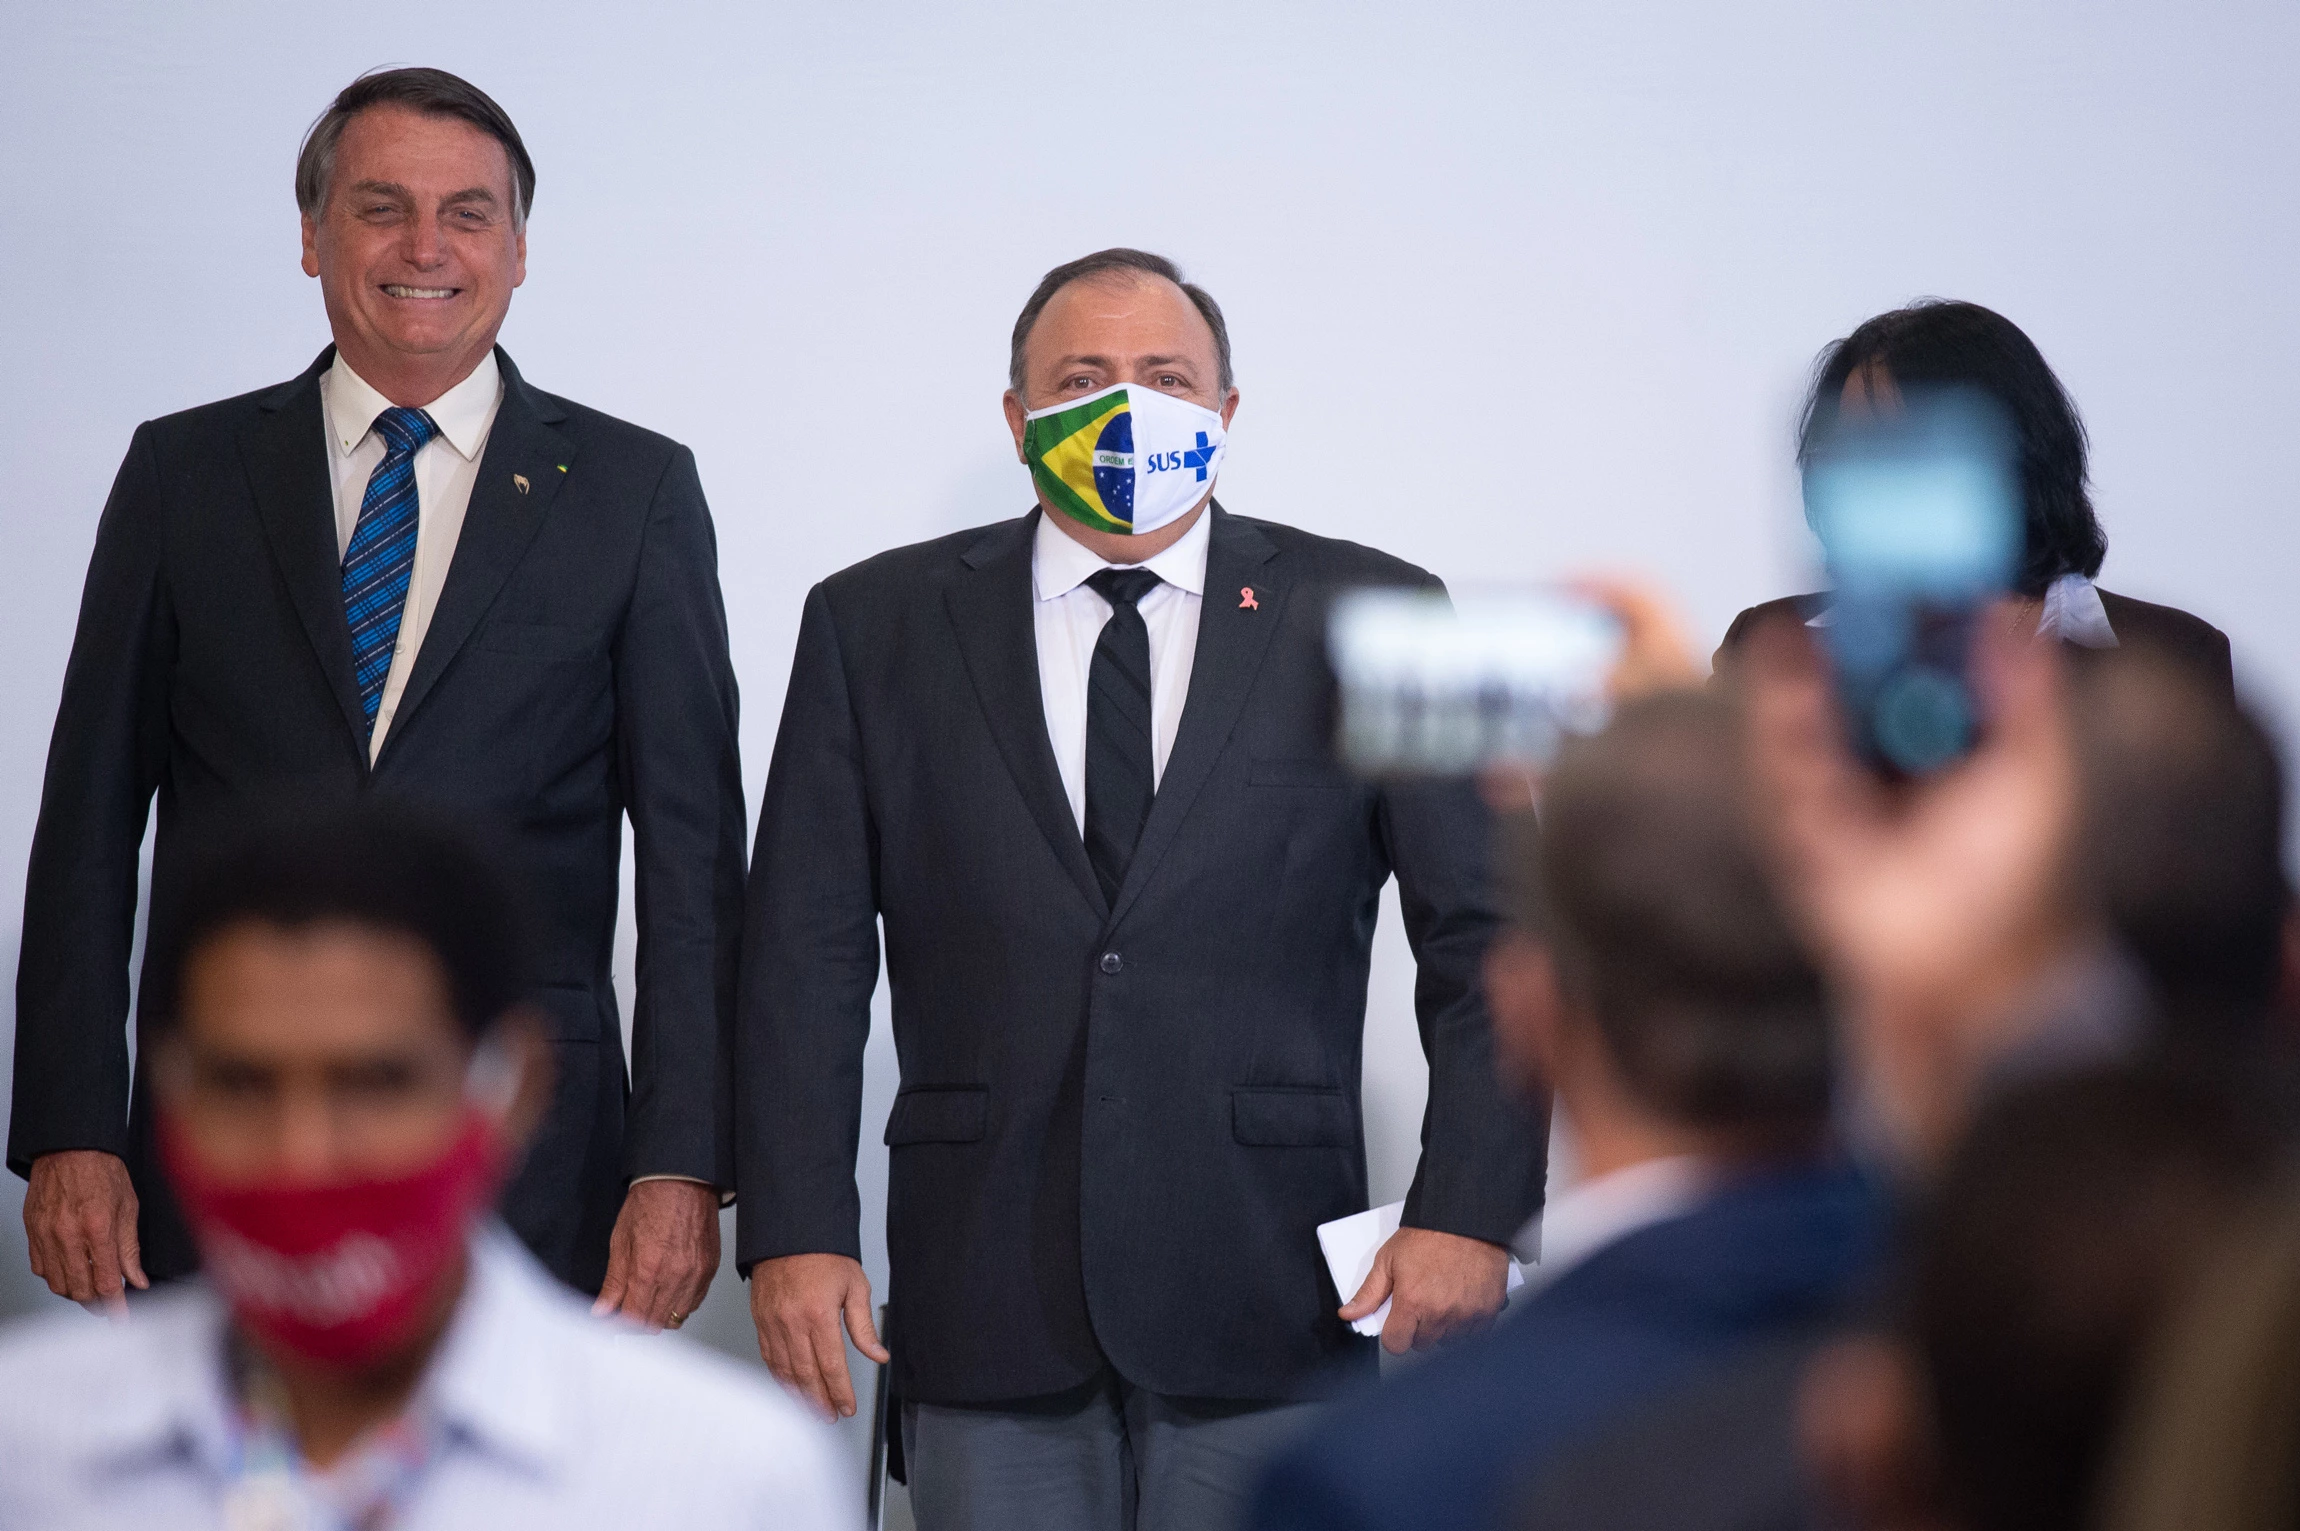 BRASILIA, BRAZIL - OCTOBER 14: Jair Bolsonaro, President of Brazil, smiles and Health Minister, Eduardo Pazuello poses during the launching of Programa Genomas Brazil amidst the coronavirus (COVID-19) pandemic at the Planalto Palace on Octuber 14, 2020 in Brasilia. Brazil has over 5.140,000 confirmed positive cases of Coronavirus and has over 151,747 deaths. (Photo by Andressa Anholete/Getty Images)